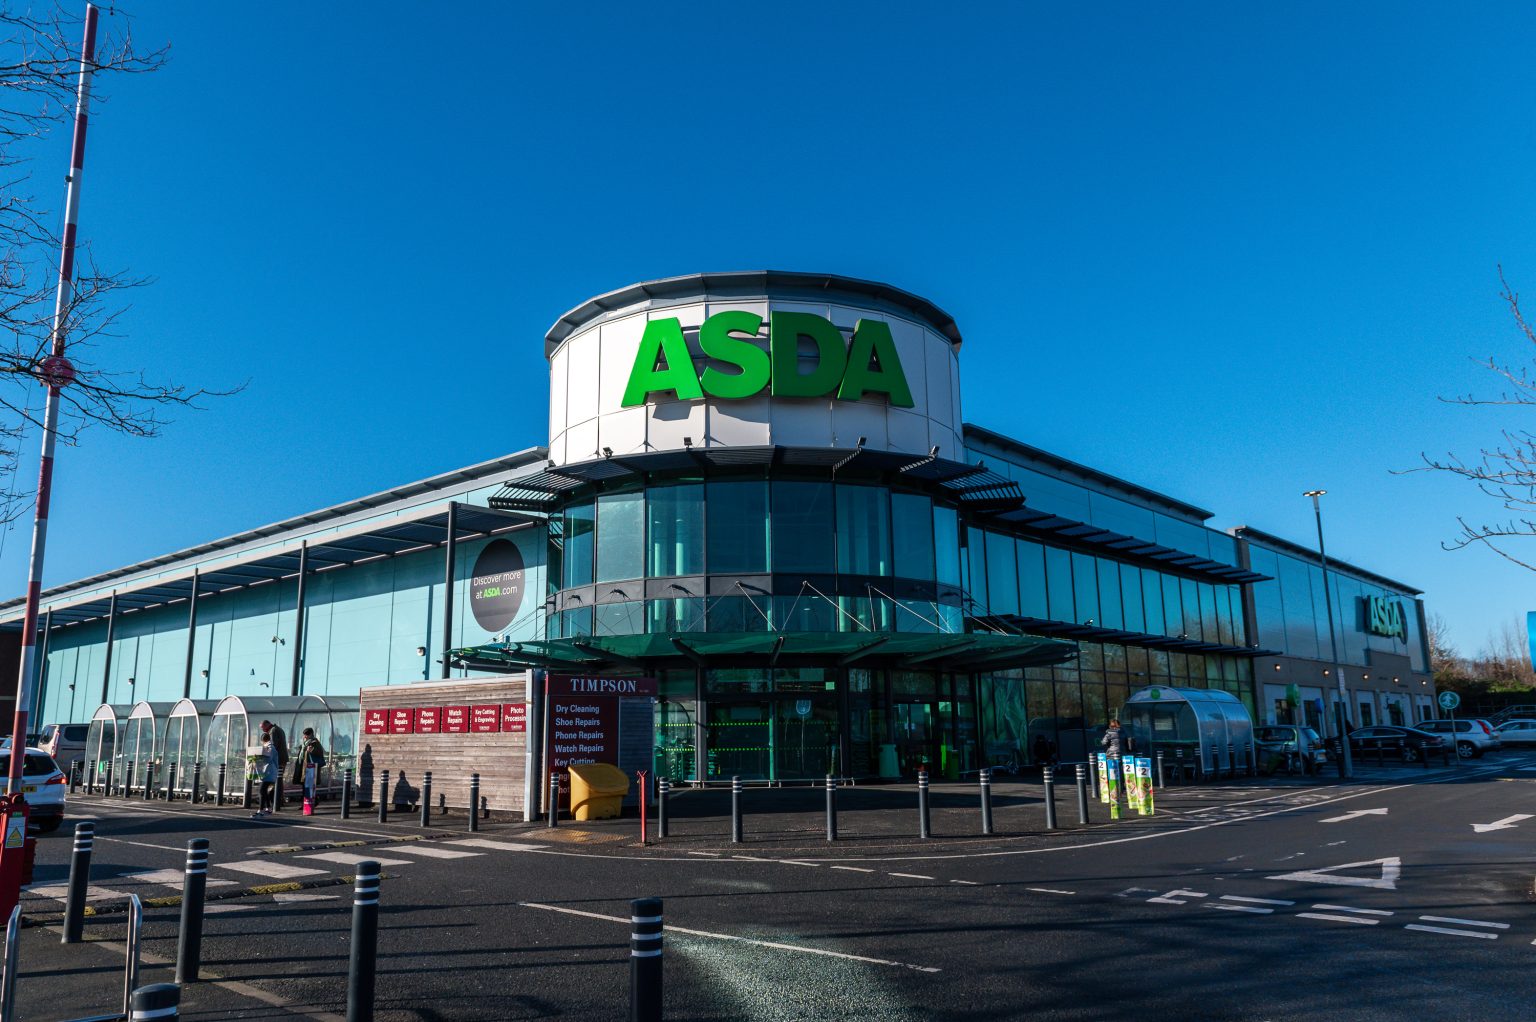 NEWS | Asda announces it will offer Ukrainian refugees arriving in the UK a guaranteed job interview with 1,500 job vacancies available